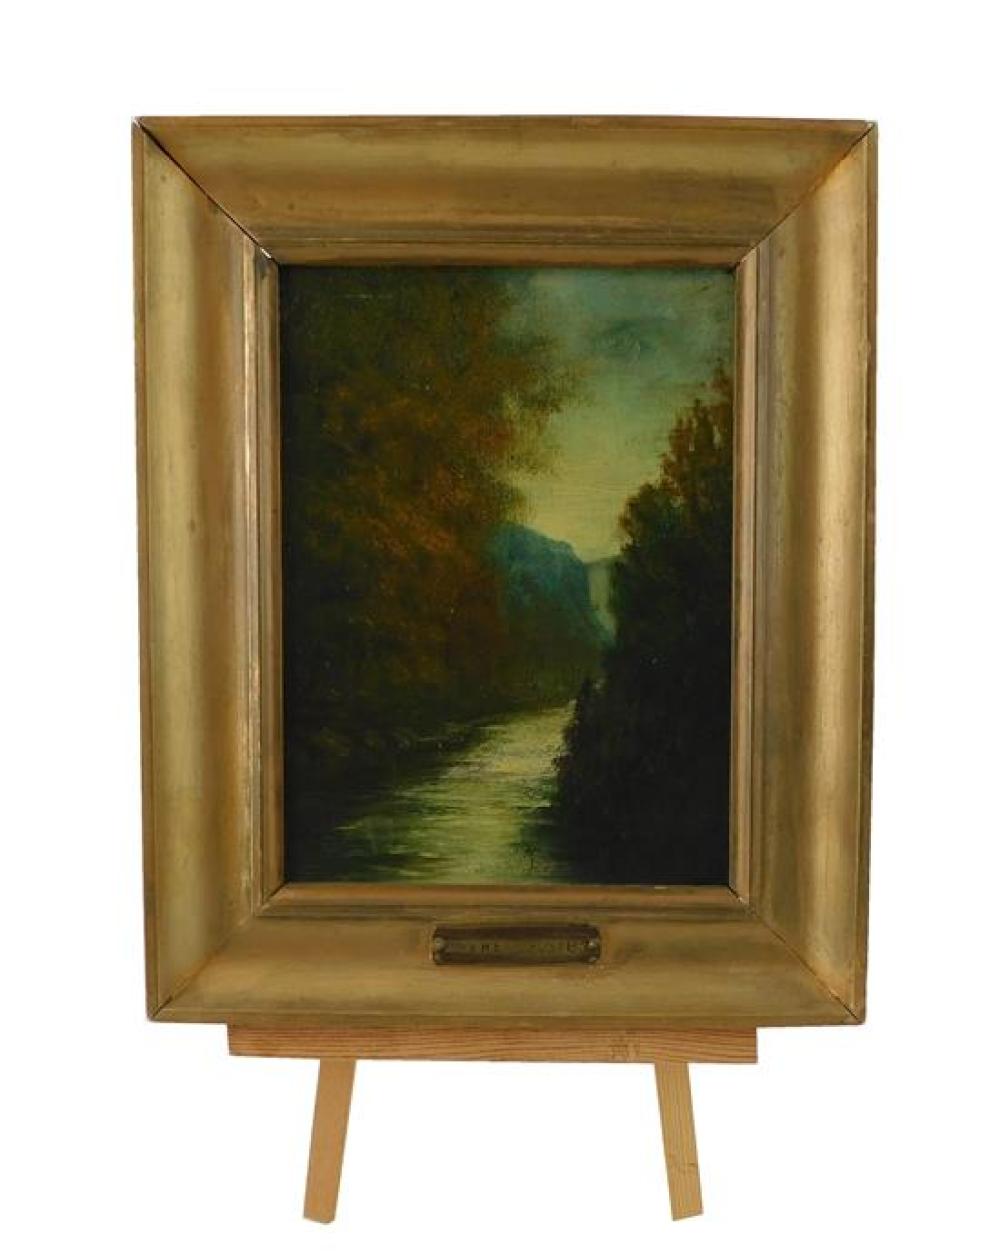 OIL ON BOARD, SMALL LANDSCAPE WITH